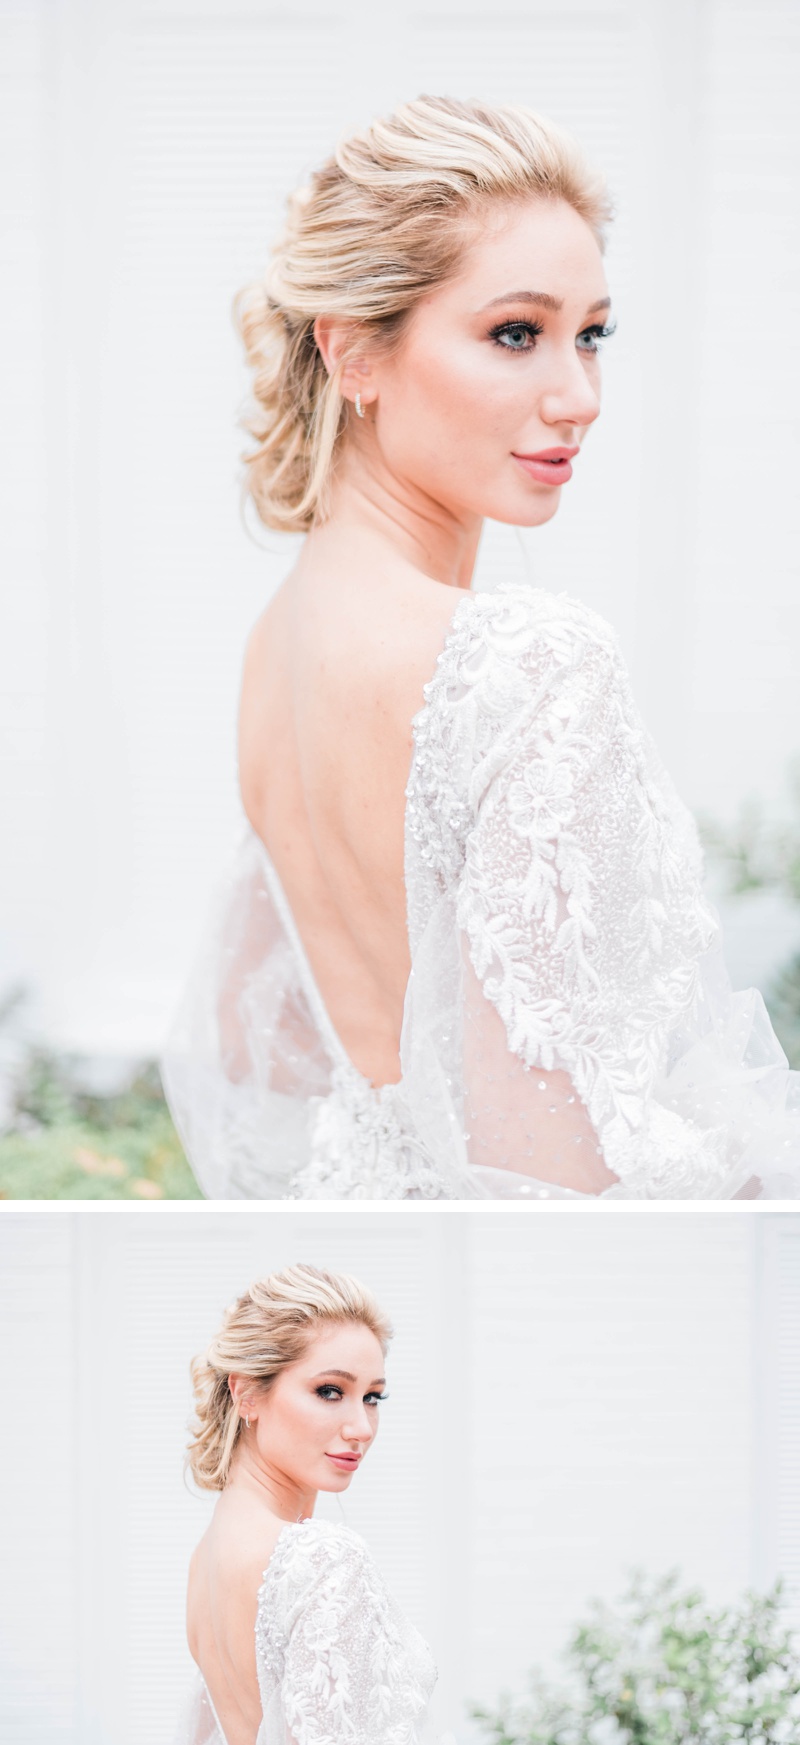 Loose, Romantic Bridal Hairstyles by Brite Beauty